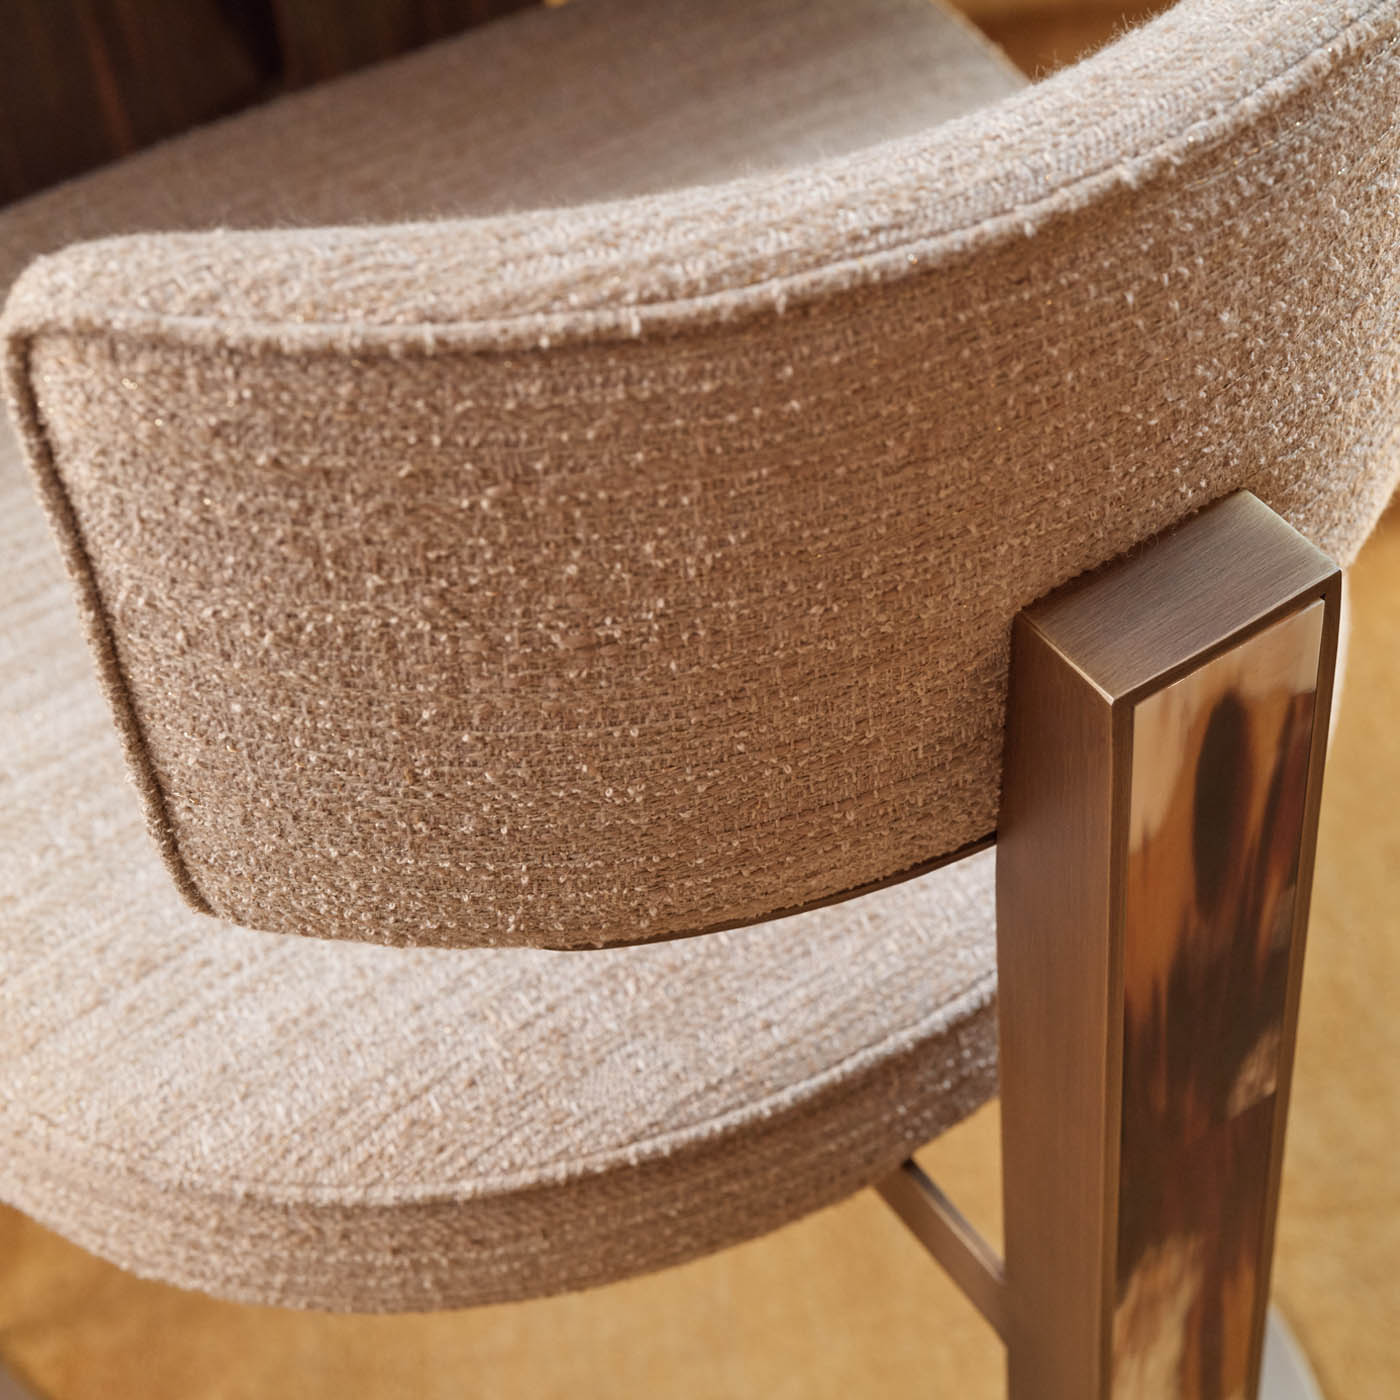 Sofas and seats - Sveva chair in Samsara fabric with horn inlays - detail - Arcahorn